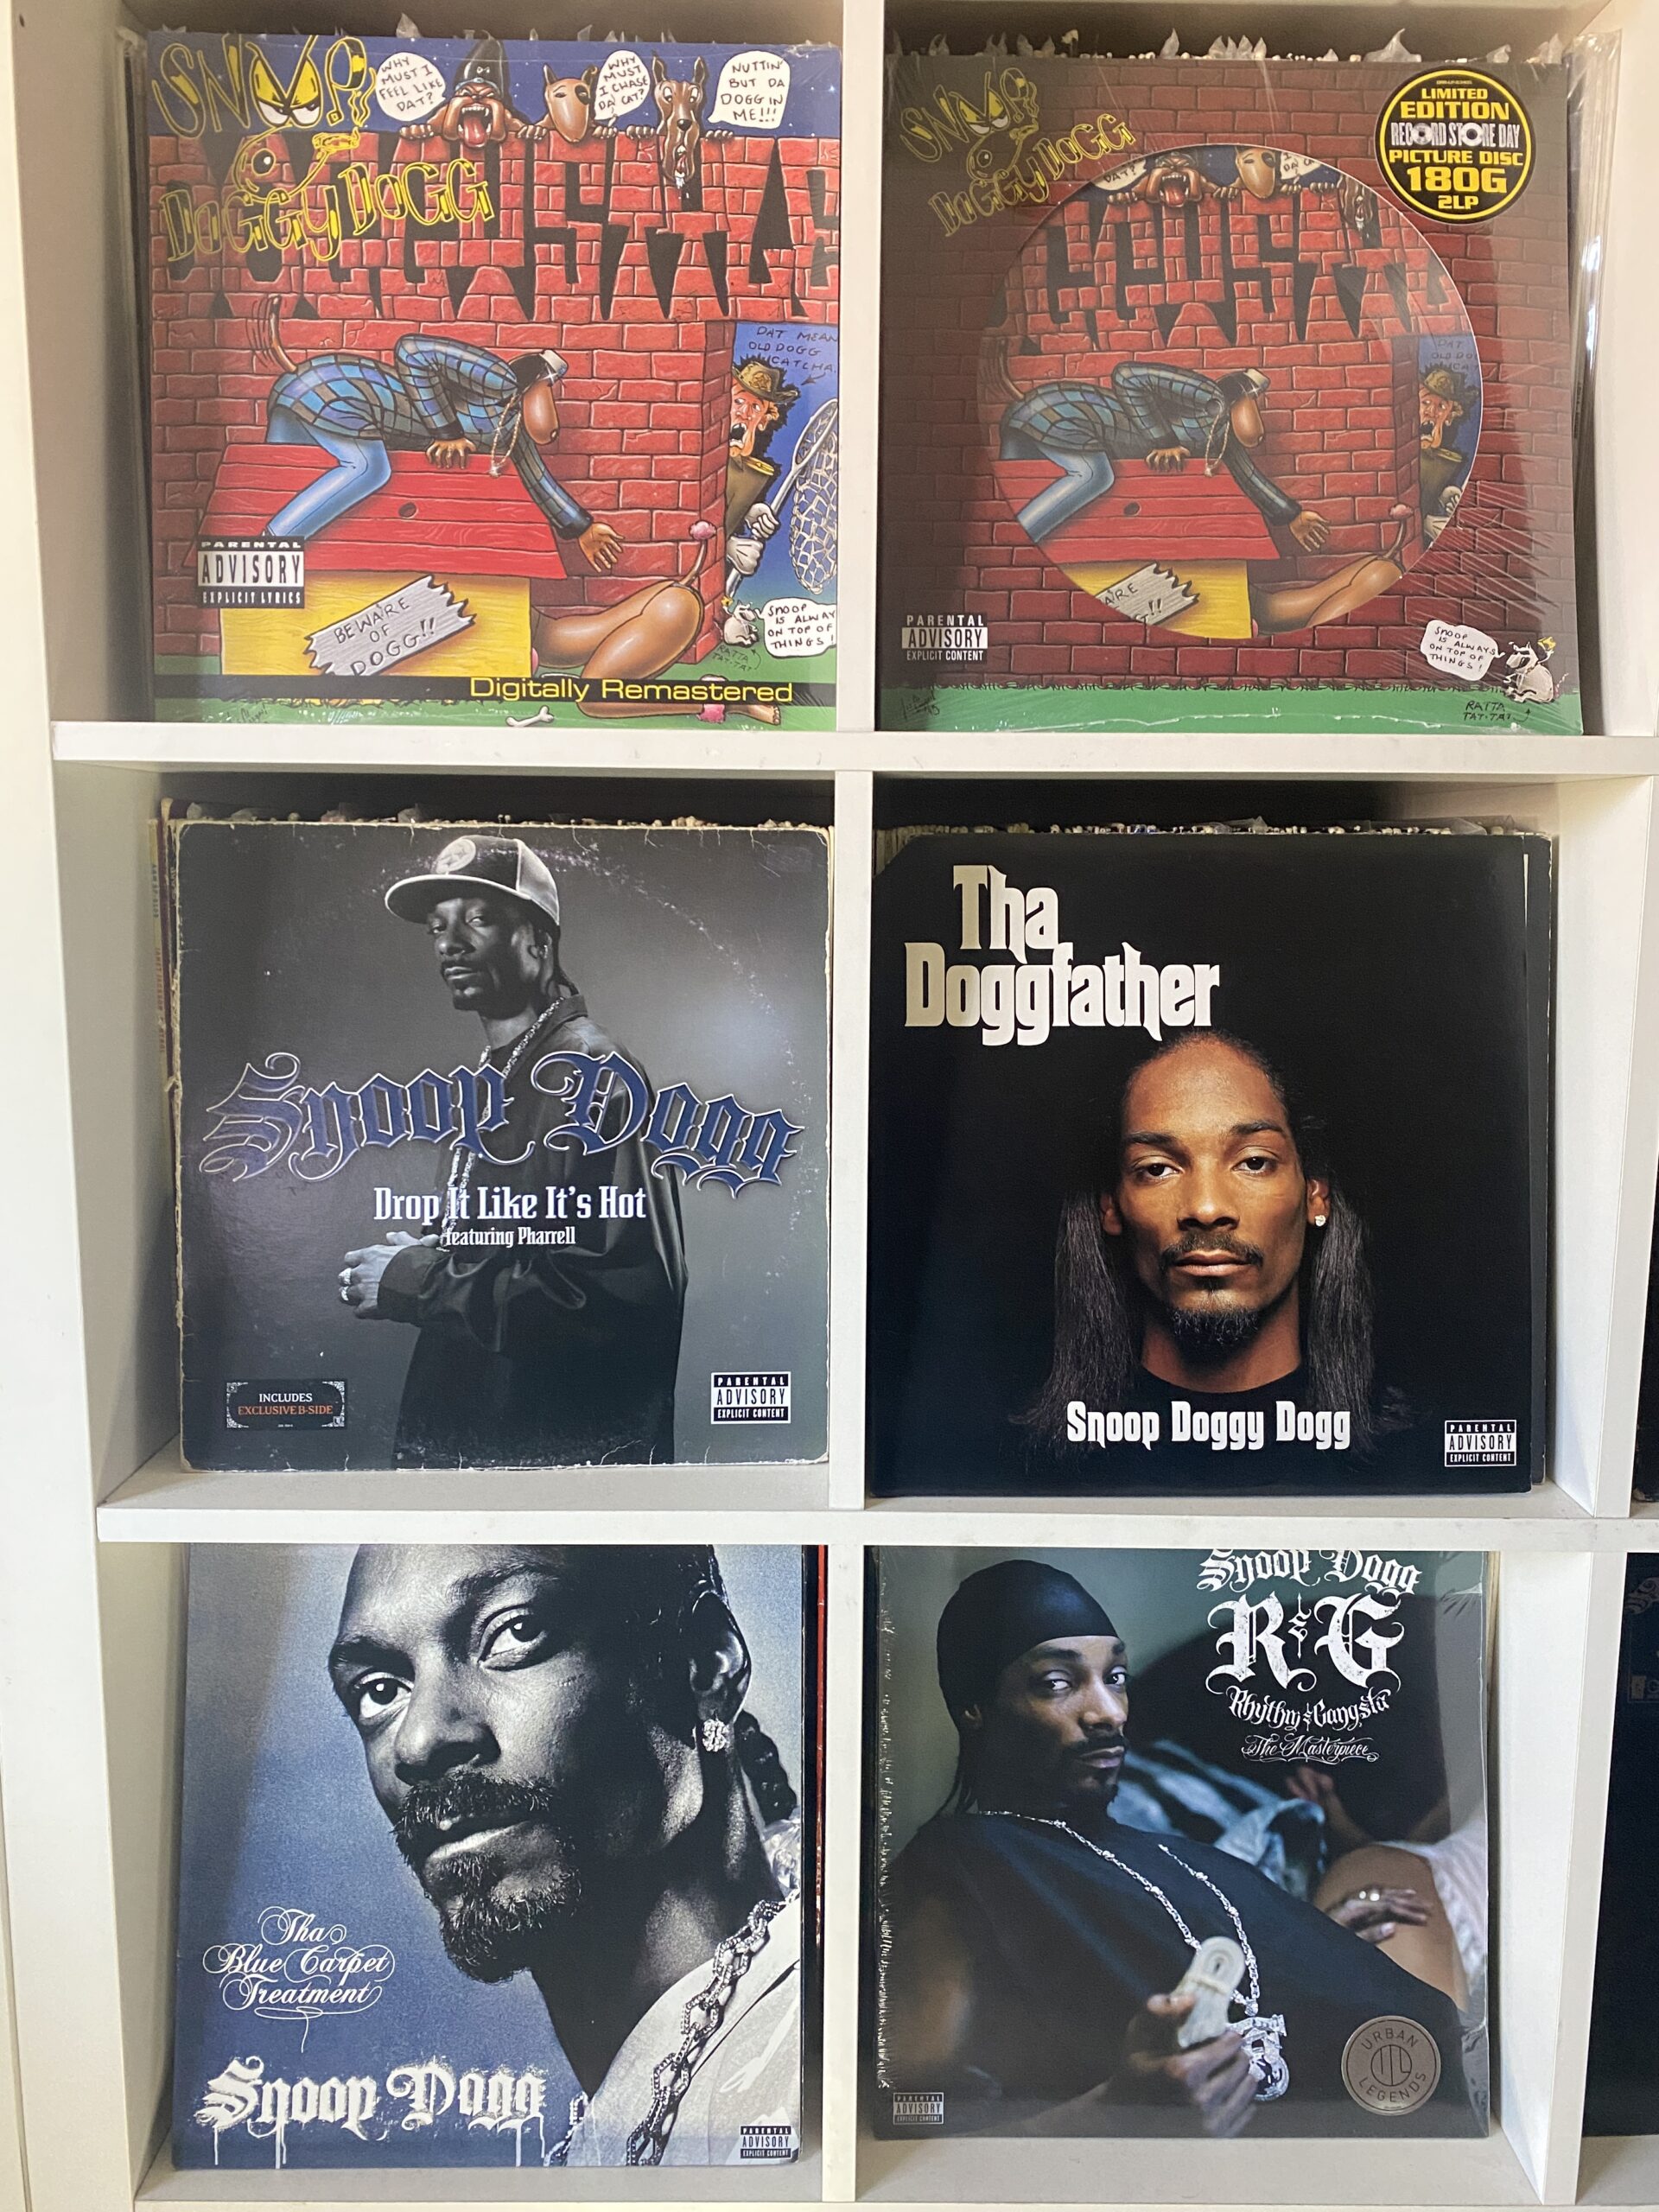 Snoop Dogg’s Legacy Continues as 19th Album Cracks the “Algorithm”